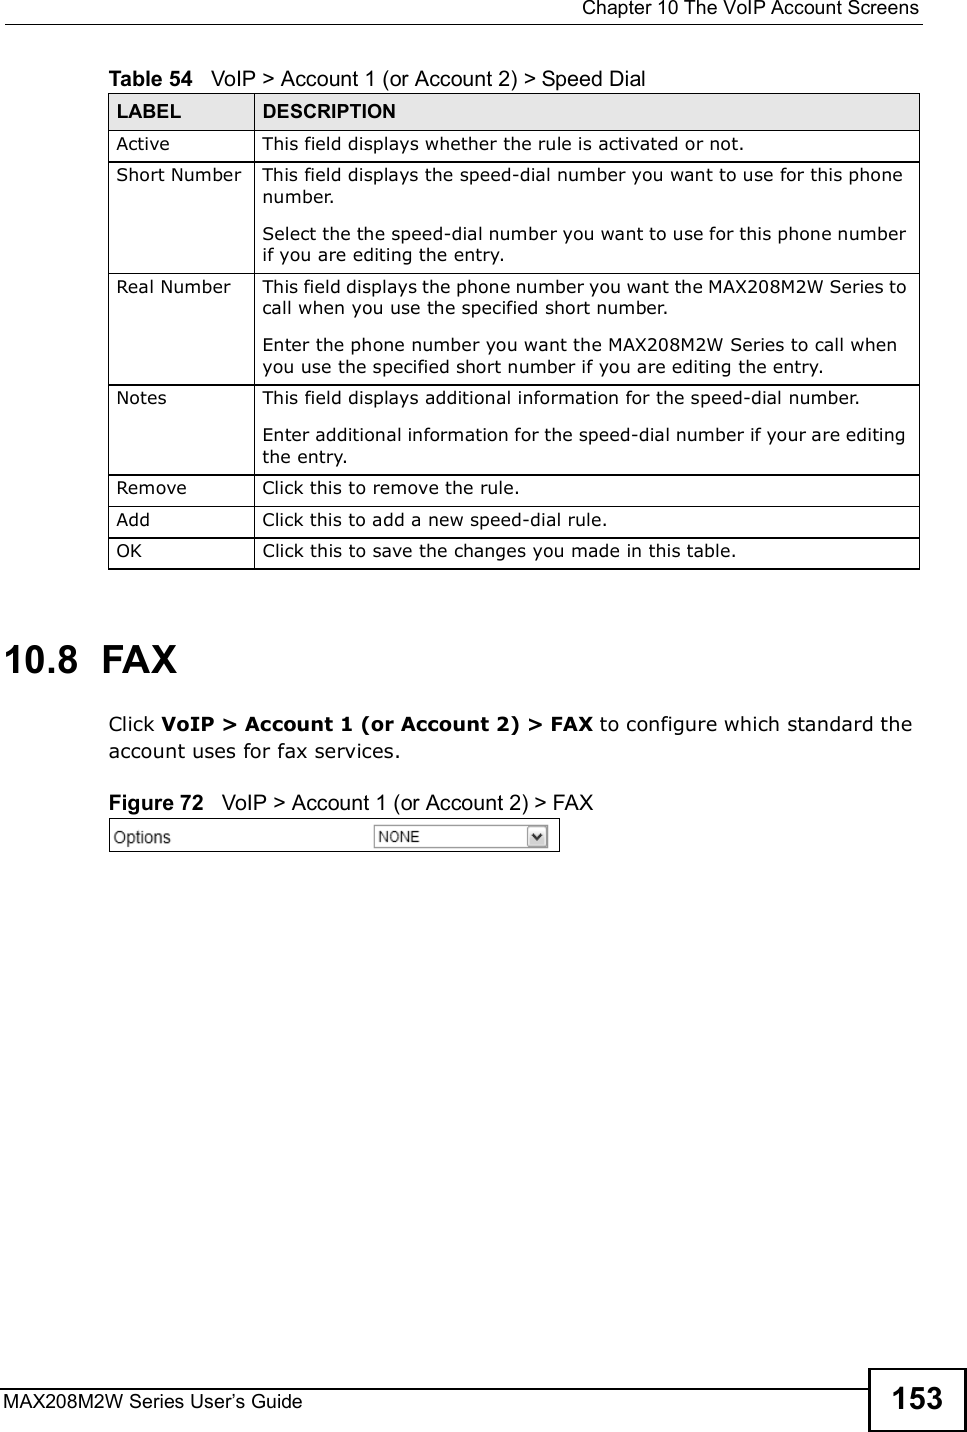  Chapter 10The VoIP Account ScreensMAX208M2W Series User s Guide 15310.8  FAXClick VoIP &gt; Account 1 (or Account 2) &gt; FAX to configure which standard the account uses for fax services.Figure 72   VoIP &gt; Account 1 (or Account 2) &gt; FAXActiveThis field displays whether the rule is activated or not.Short NumberThis field displays the speed-dial number you want to use for this phone number. Select the the speed-dial number you want to use for this phone number if you are editing the entry.Real NumberThis field displays the phone number you want the MAX208M2W Series to call when you use the specified short number.Enter the phone number you want the MAX208M2W Series to call when you use the specified short number if you are editing the entry.NotesThis field displays additional information for the speed-dial number.Enter additional information for the speed-dial number if your are editing the entry.RemoveClick this to remove the rule.AddClick this to add a new speed-dial rule.OK Click this to save the changes you made in this table.Table 54   VoIP &gt; Account 1 (or Account 2) &gt; Speed DialLABEL DESCRIPTION